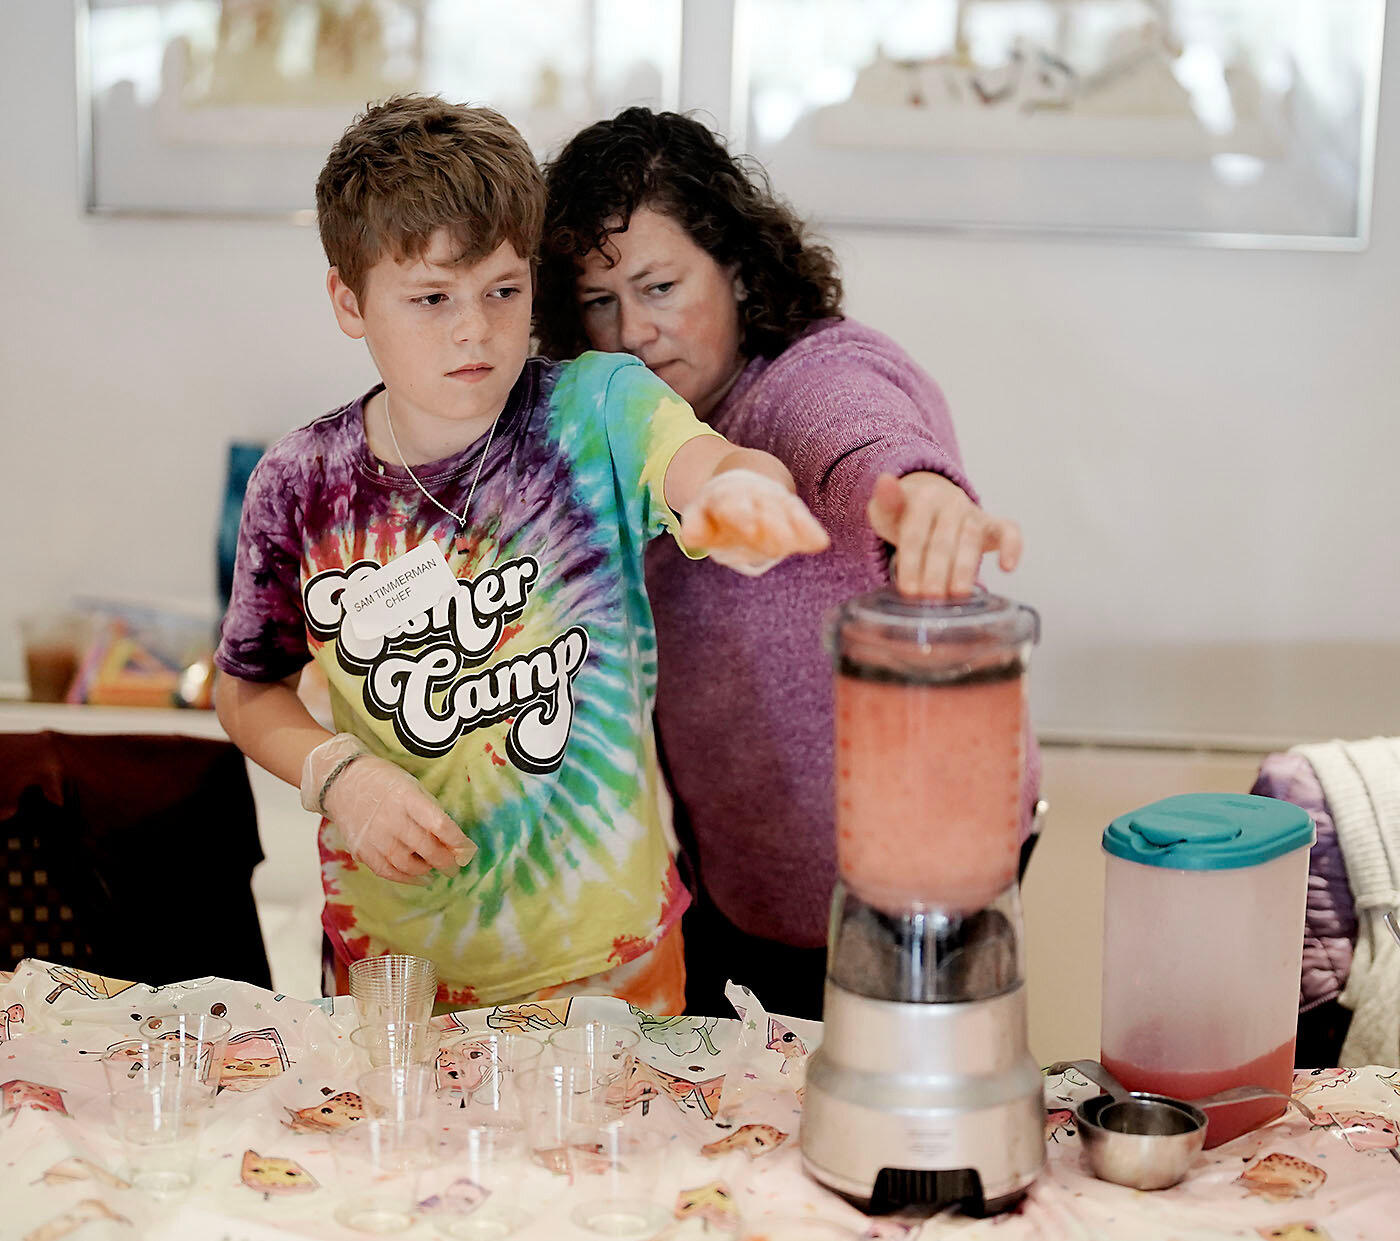 Sam Timmerman, and his mother Debby Levine, of Providence, blending a Thai watermelon slushie.